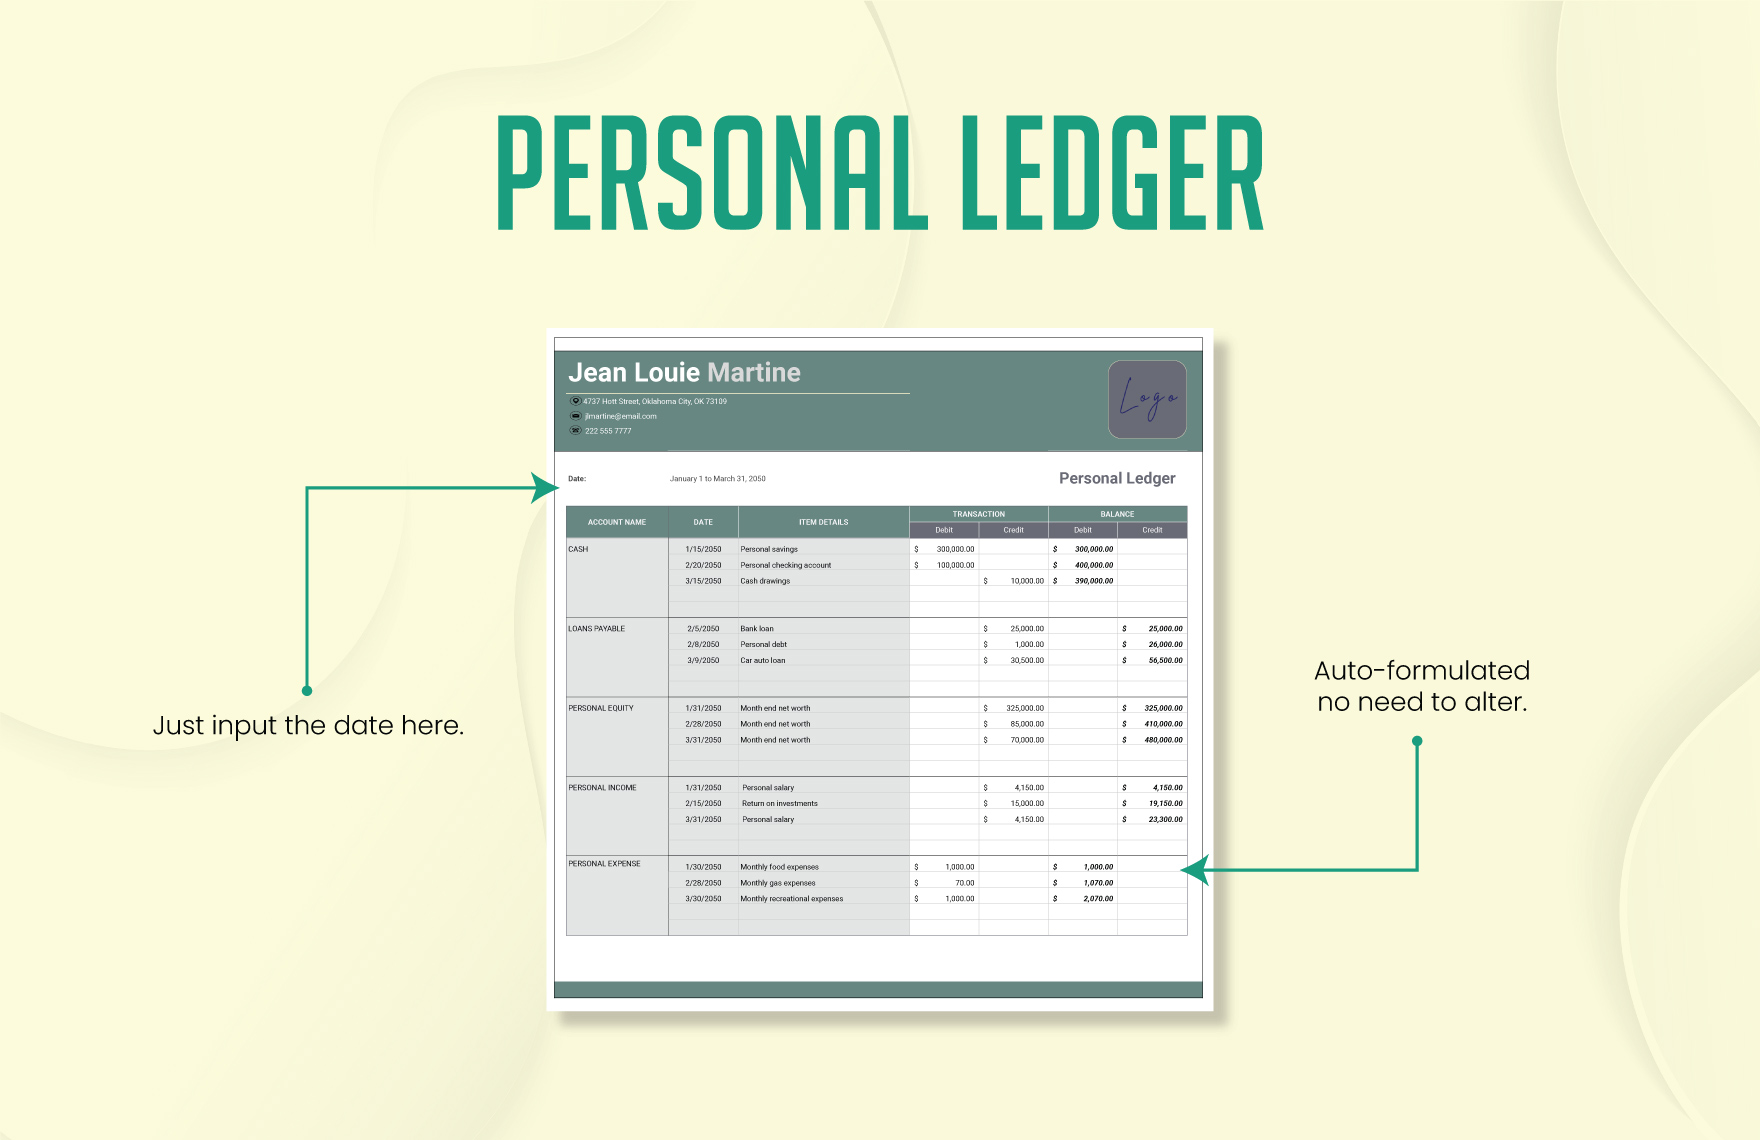 Personal Ledger Template